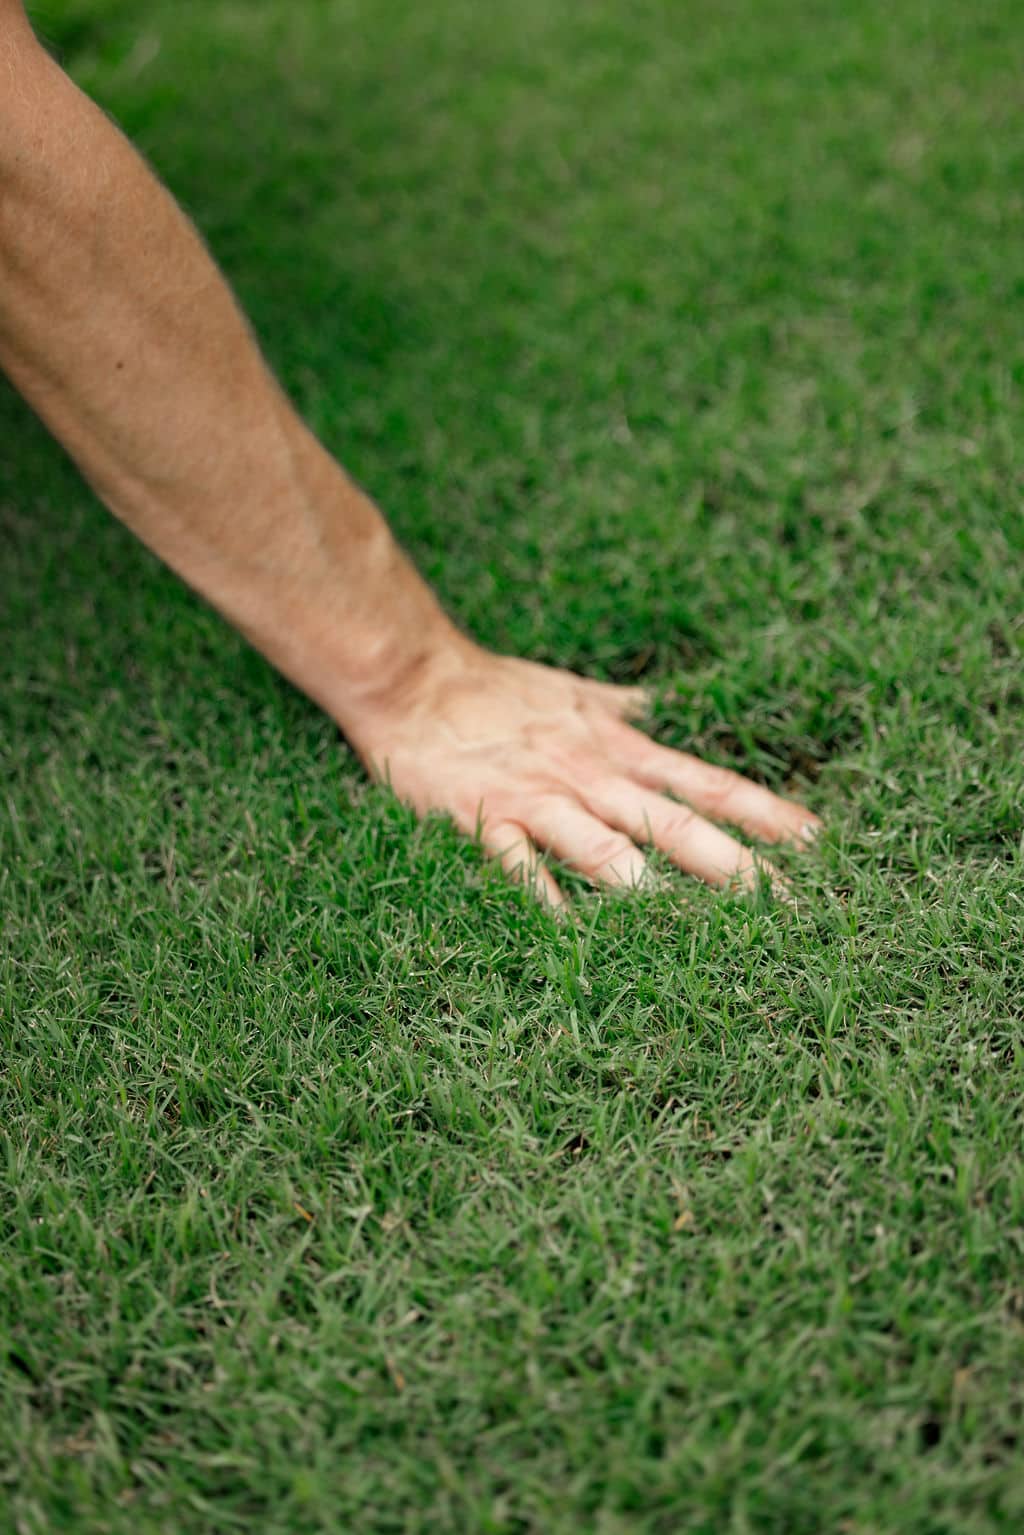 When Should I Stop Mowing My Lawn after Summer?